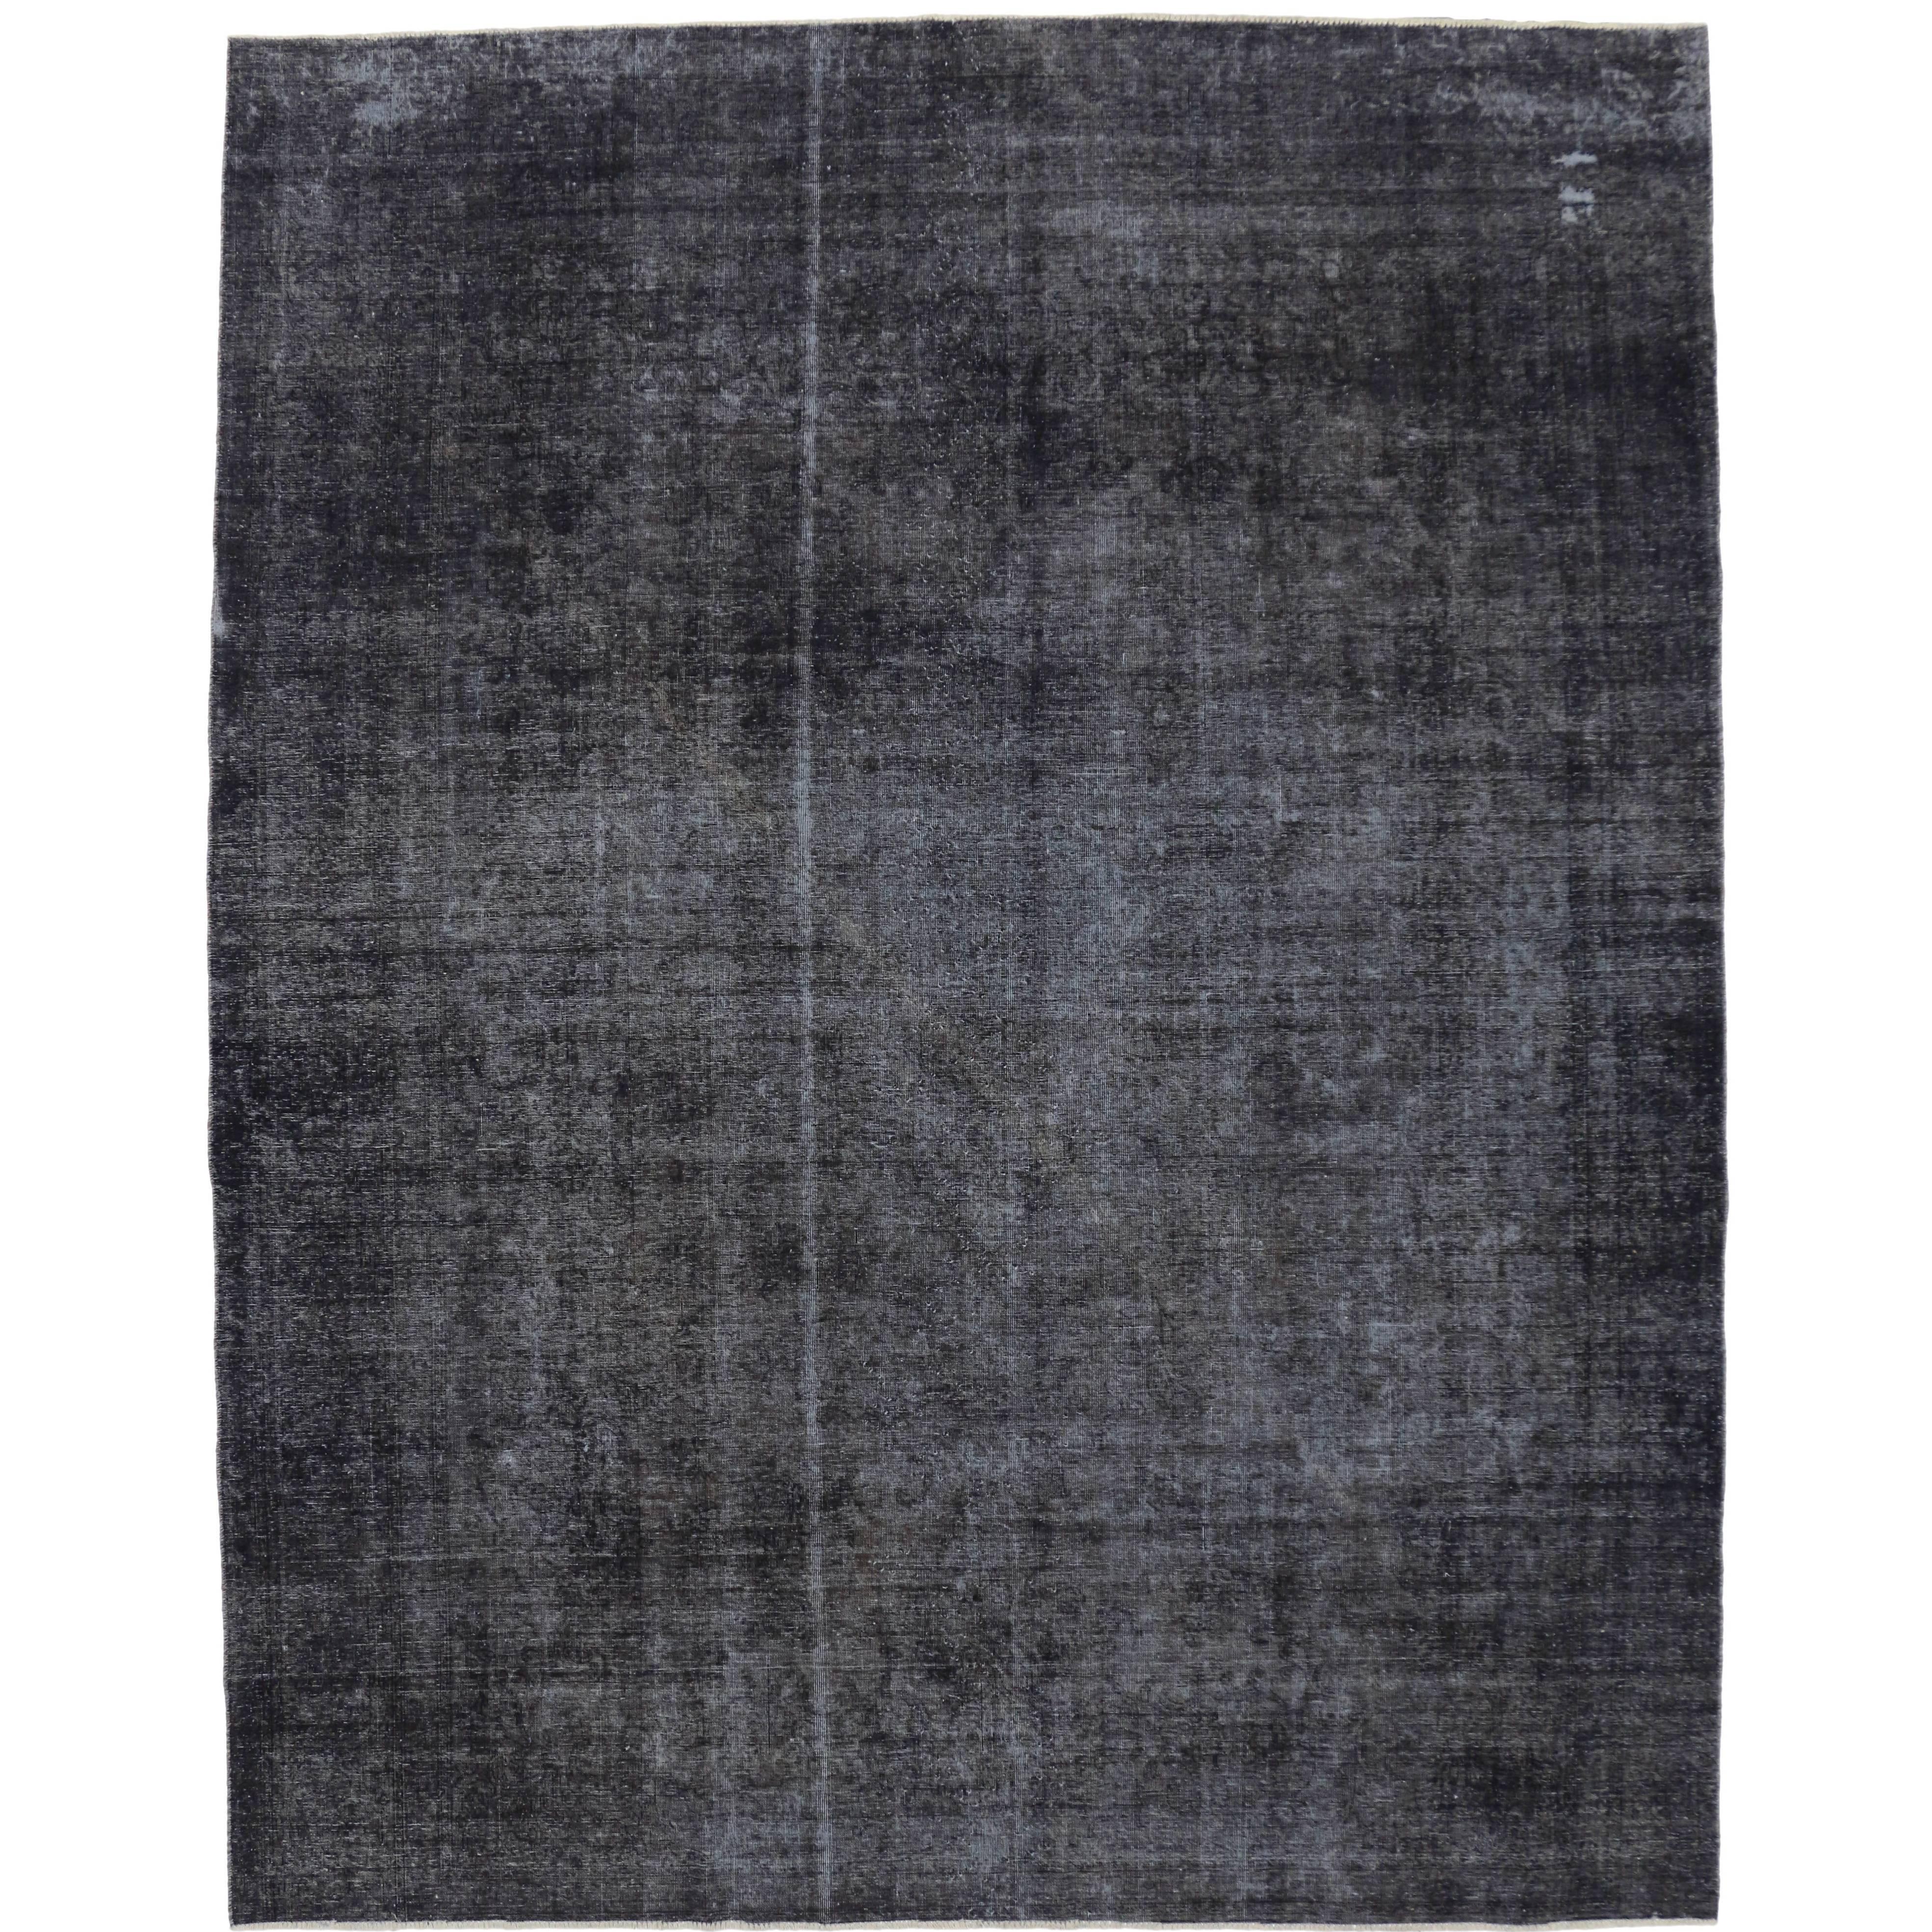 Distressed Antique Persian Charcoal Overdyed Rug with Modern Industrial Style